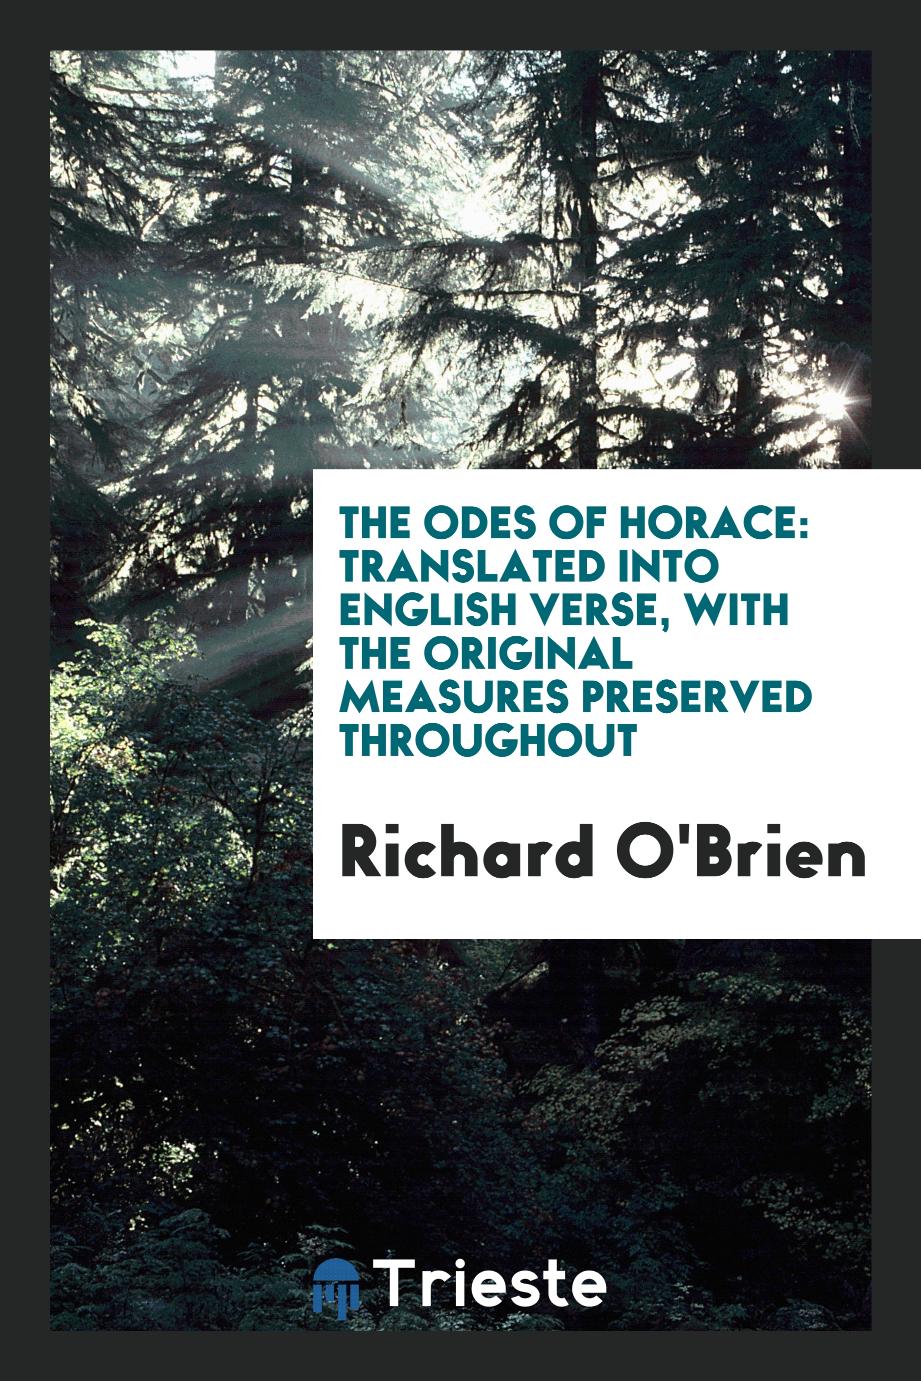 The Odes of Horace: Translated into English Verse, with the Original Measures Preserved Throughout